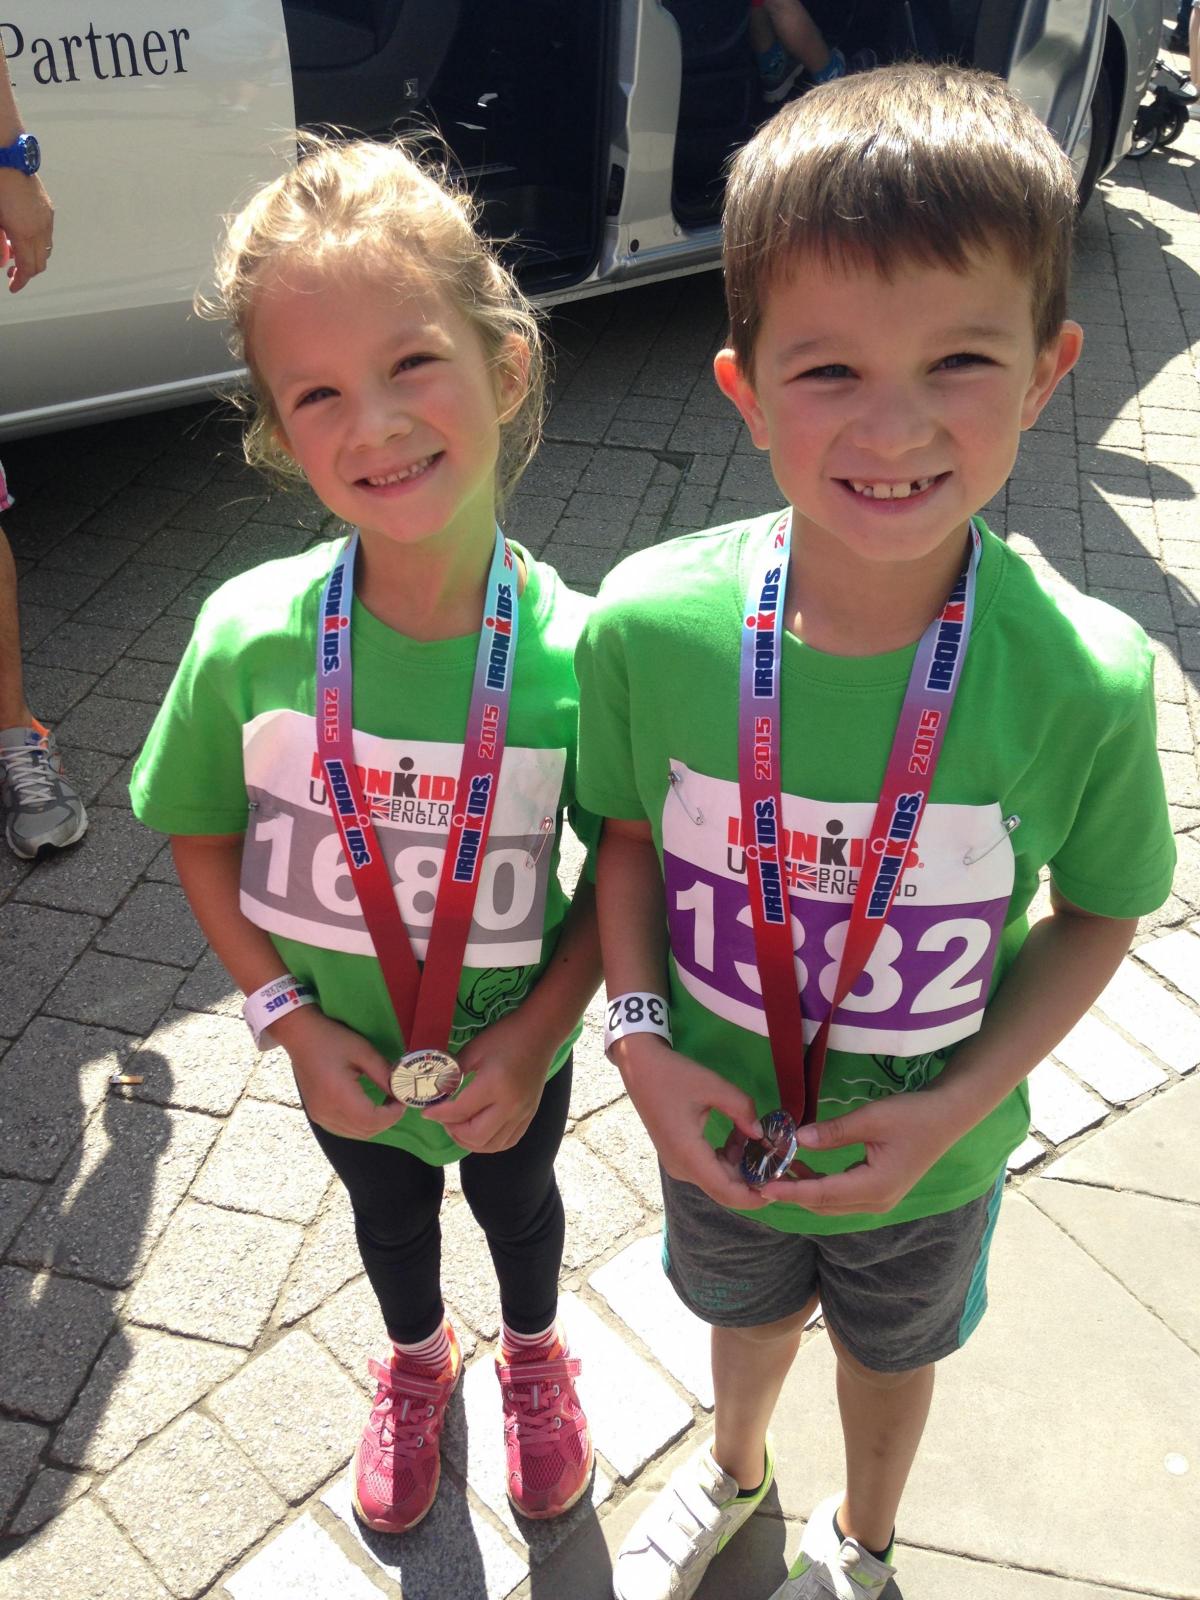 Emily Dickinson, aged six, and seven-year-old brother Jacob from Bradshaw. Jacob finished 13th in his race while Emily finished fifth and was the first girl.